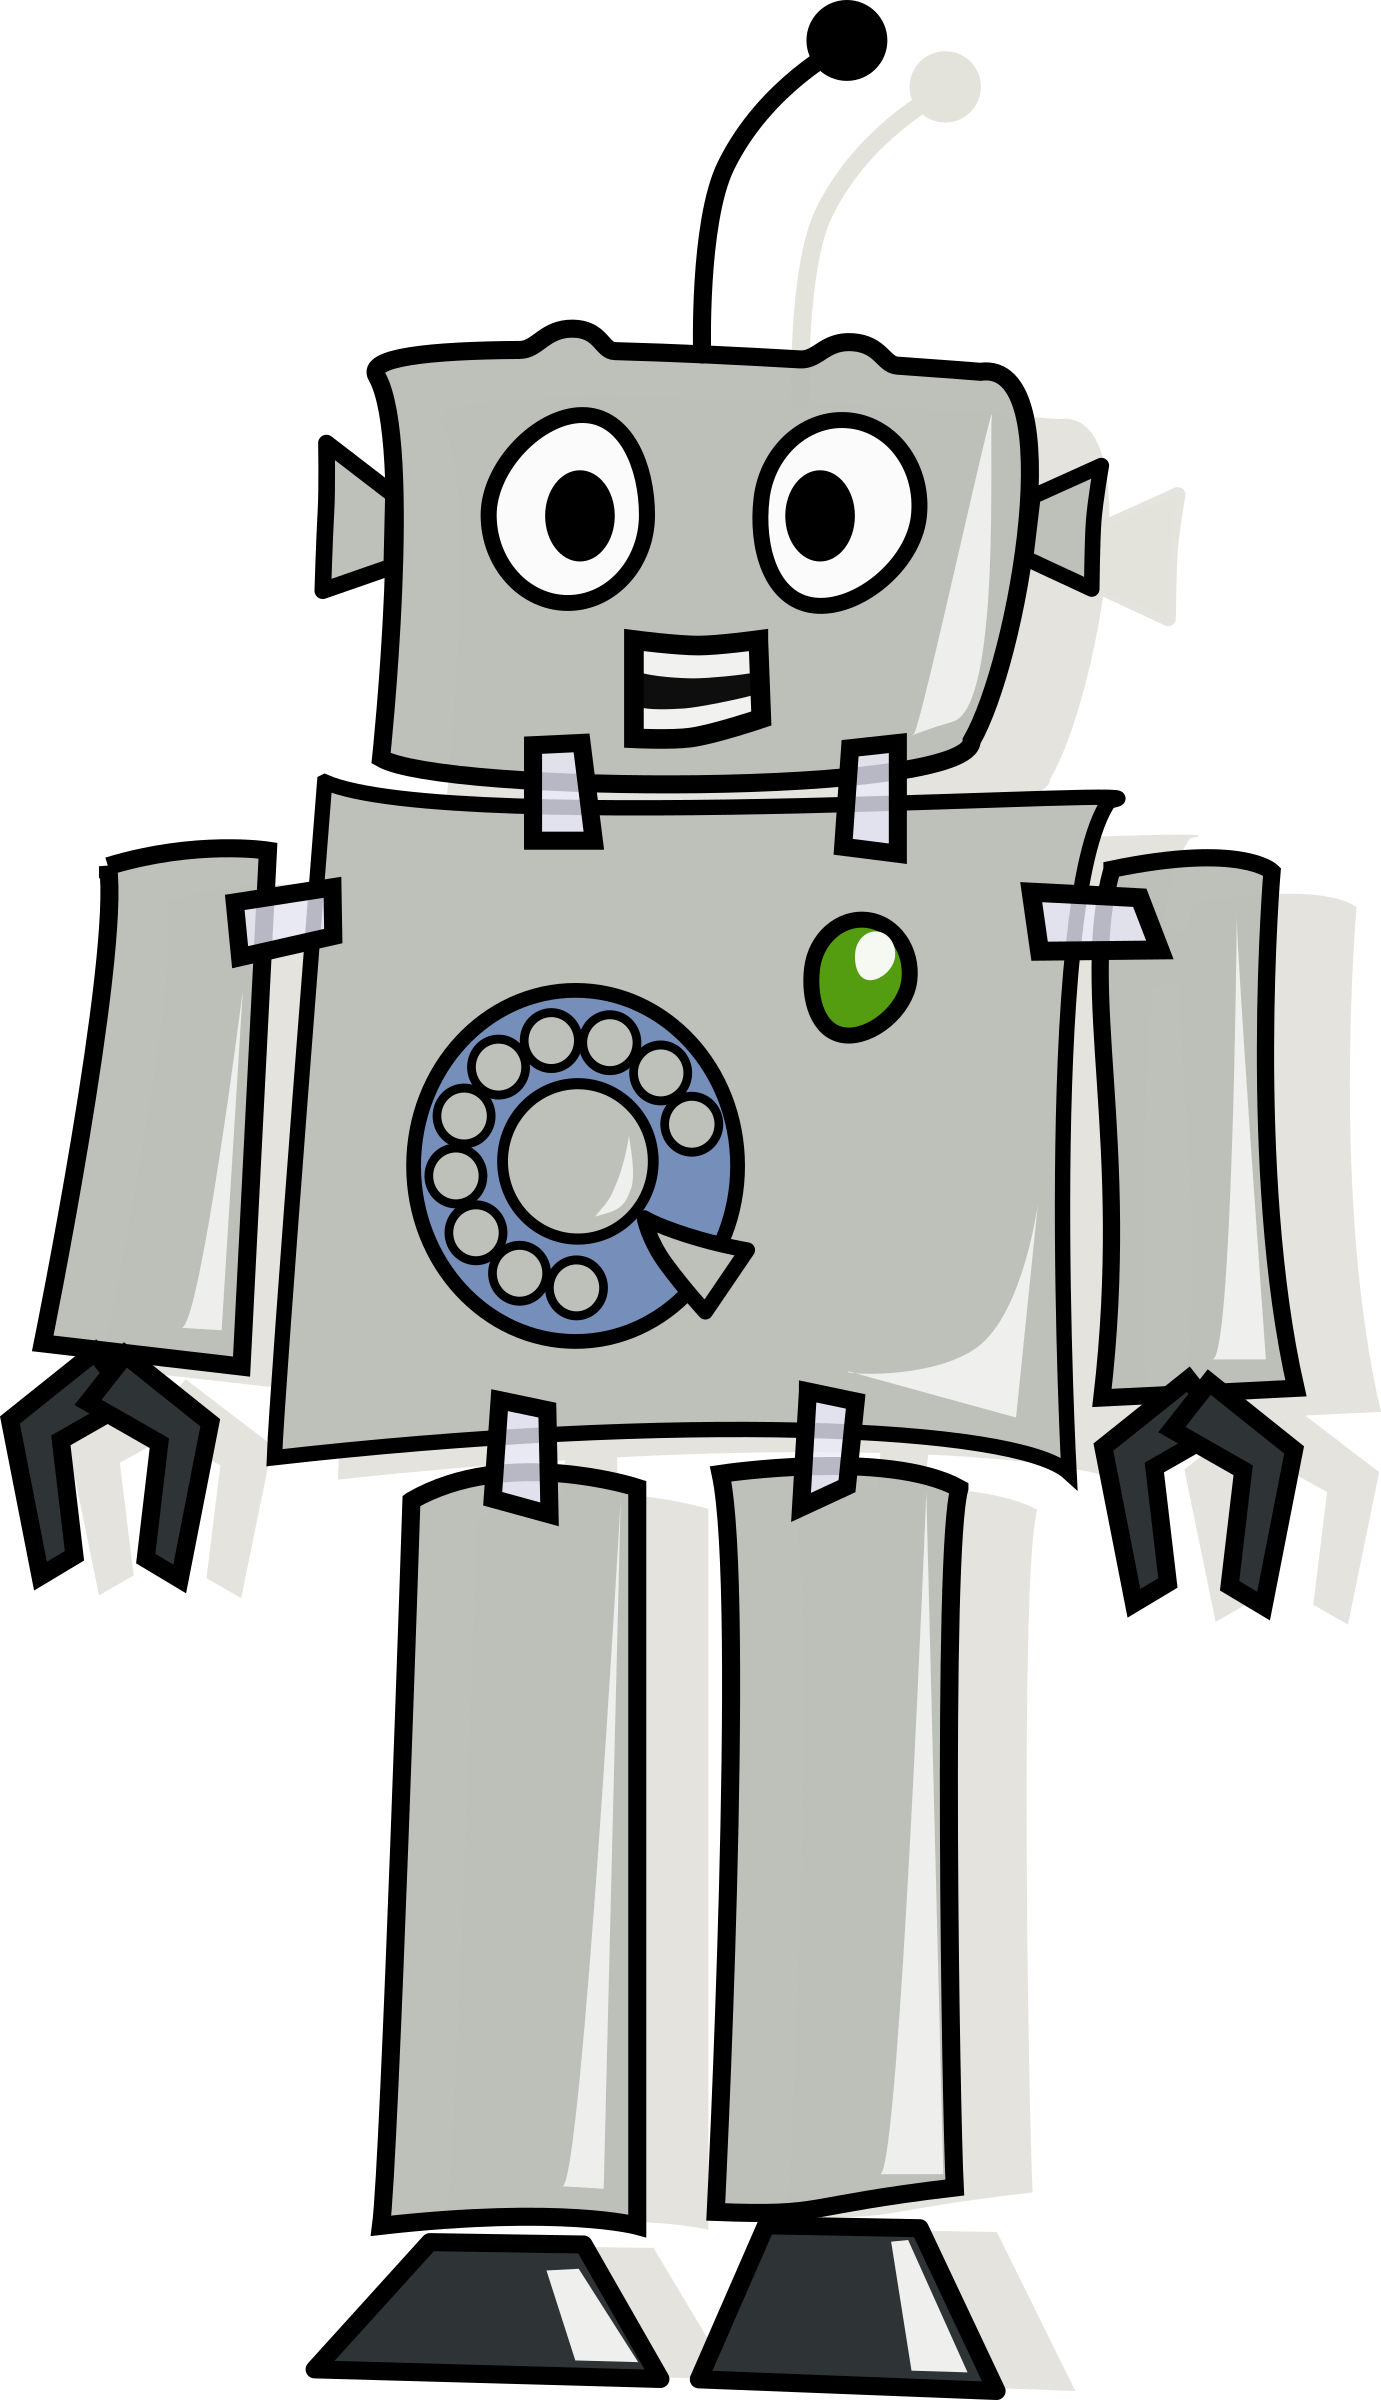 This Free Icons Png Design Of Answerphone Robot